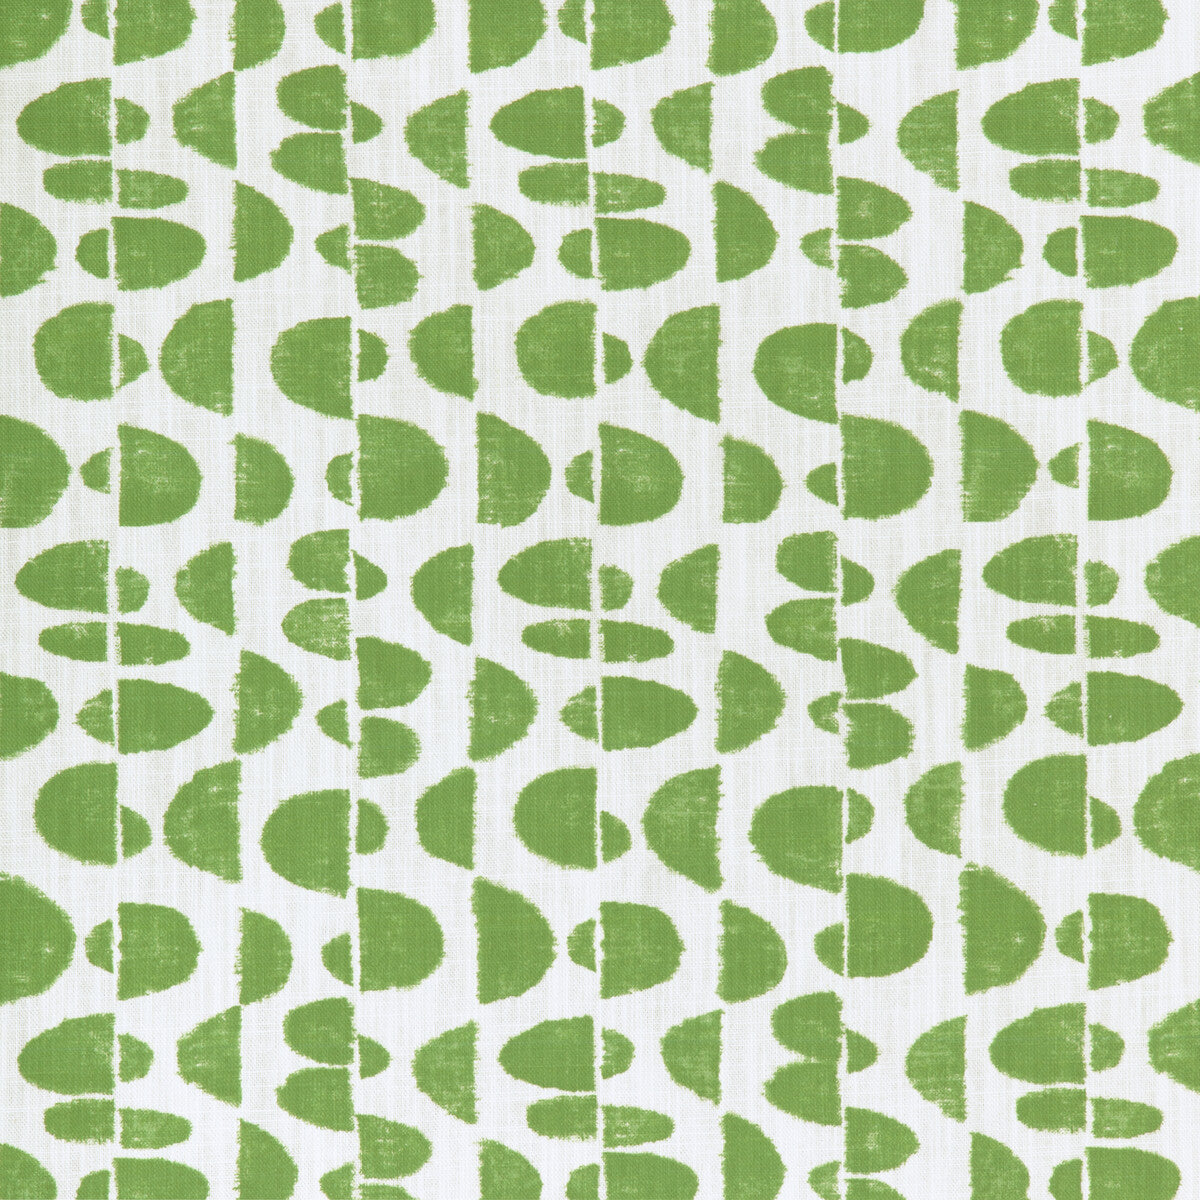 Moon Phase fabric in aloe color - pattern MOON PHASE.31.0 - by Kravet Basics in the Small Scale Prints collection